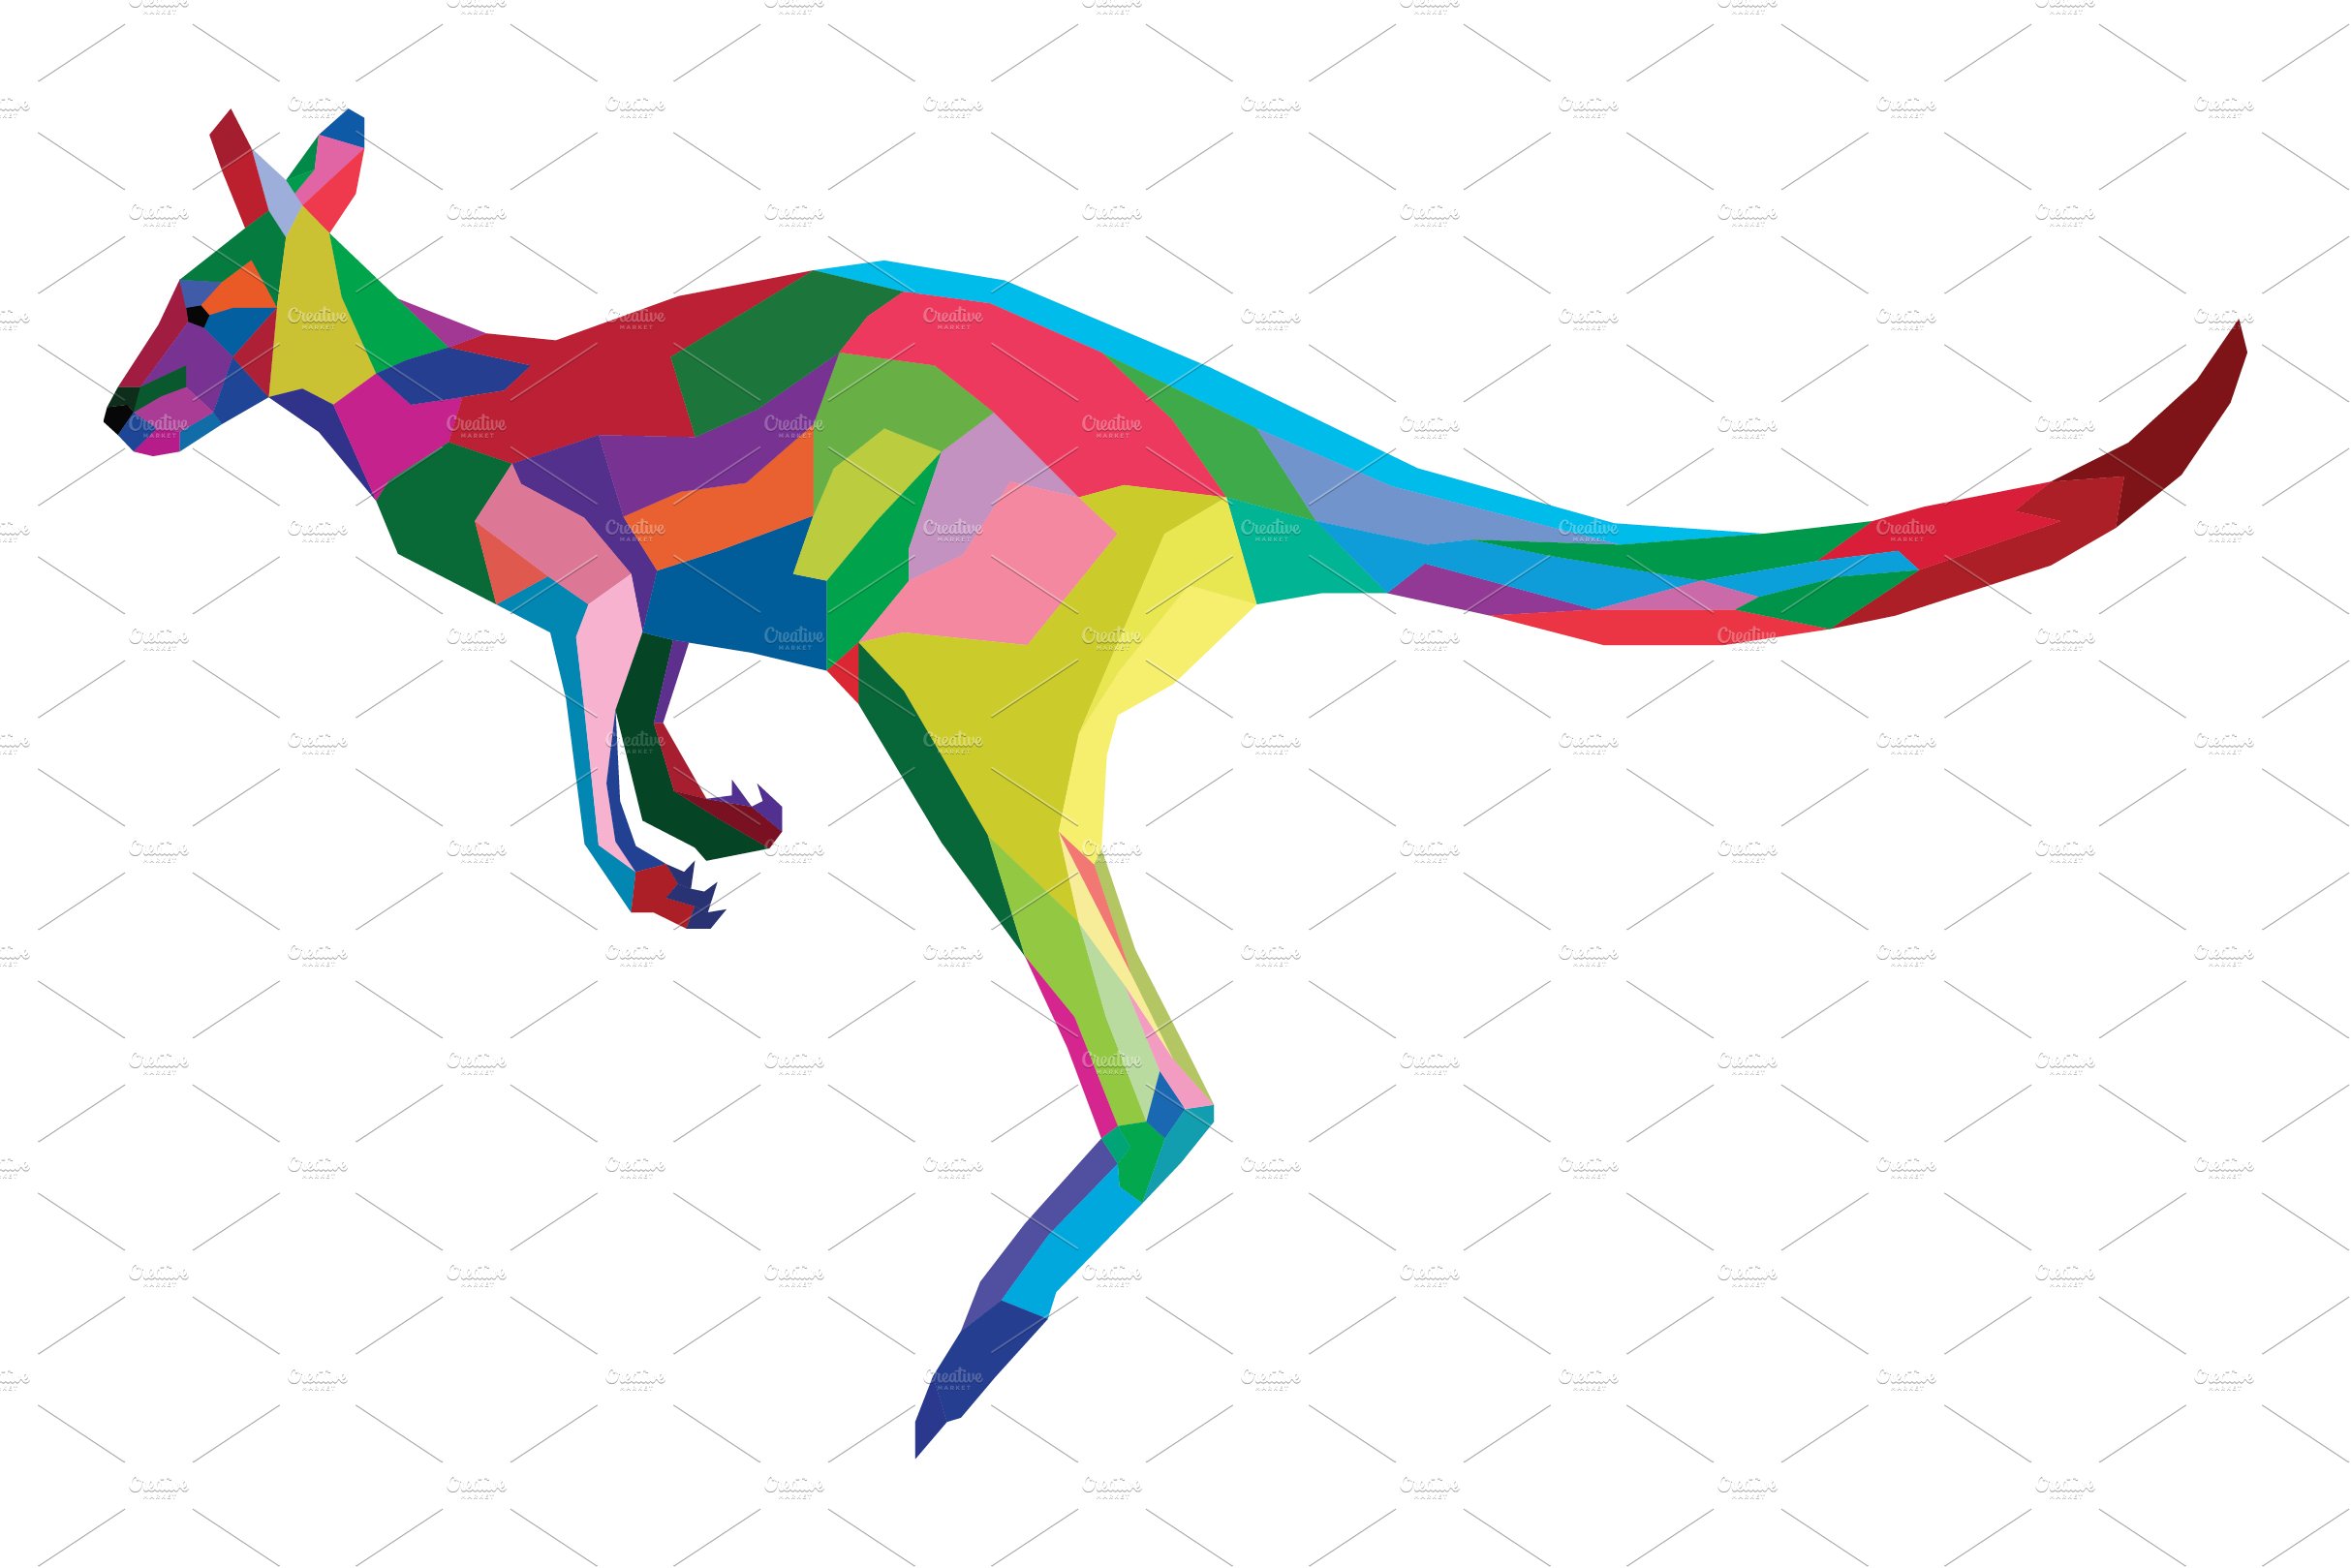 So colorul multicolor kangaroo with the geometric shapes.